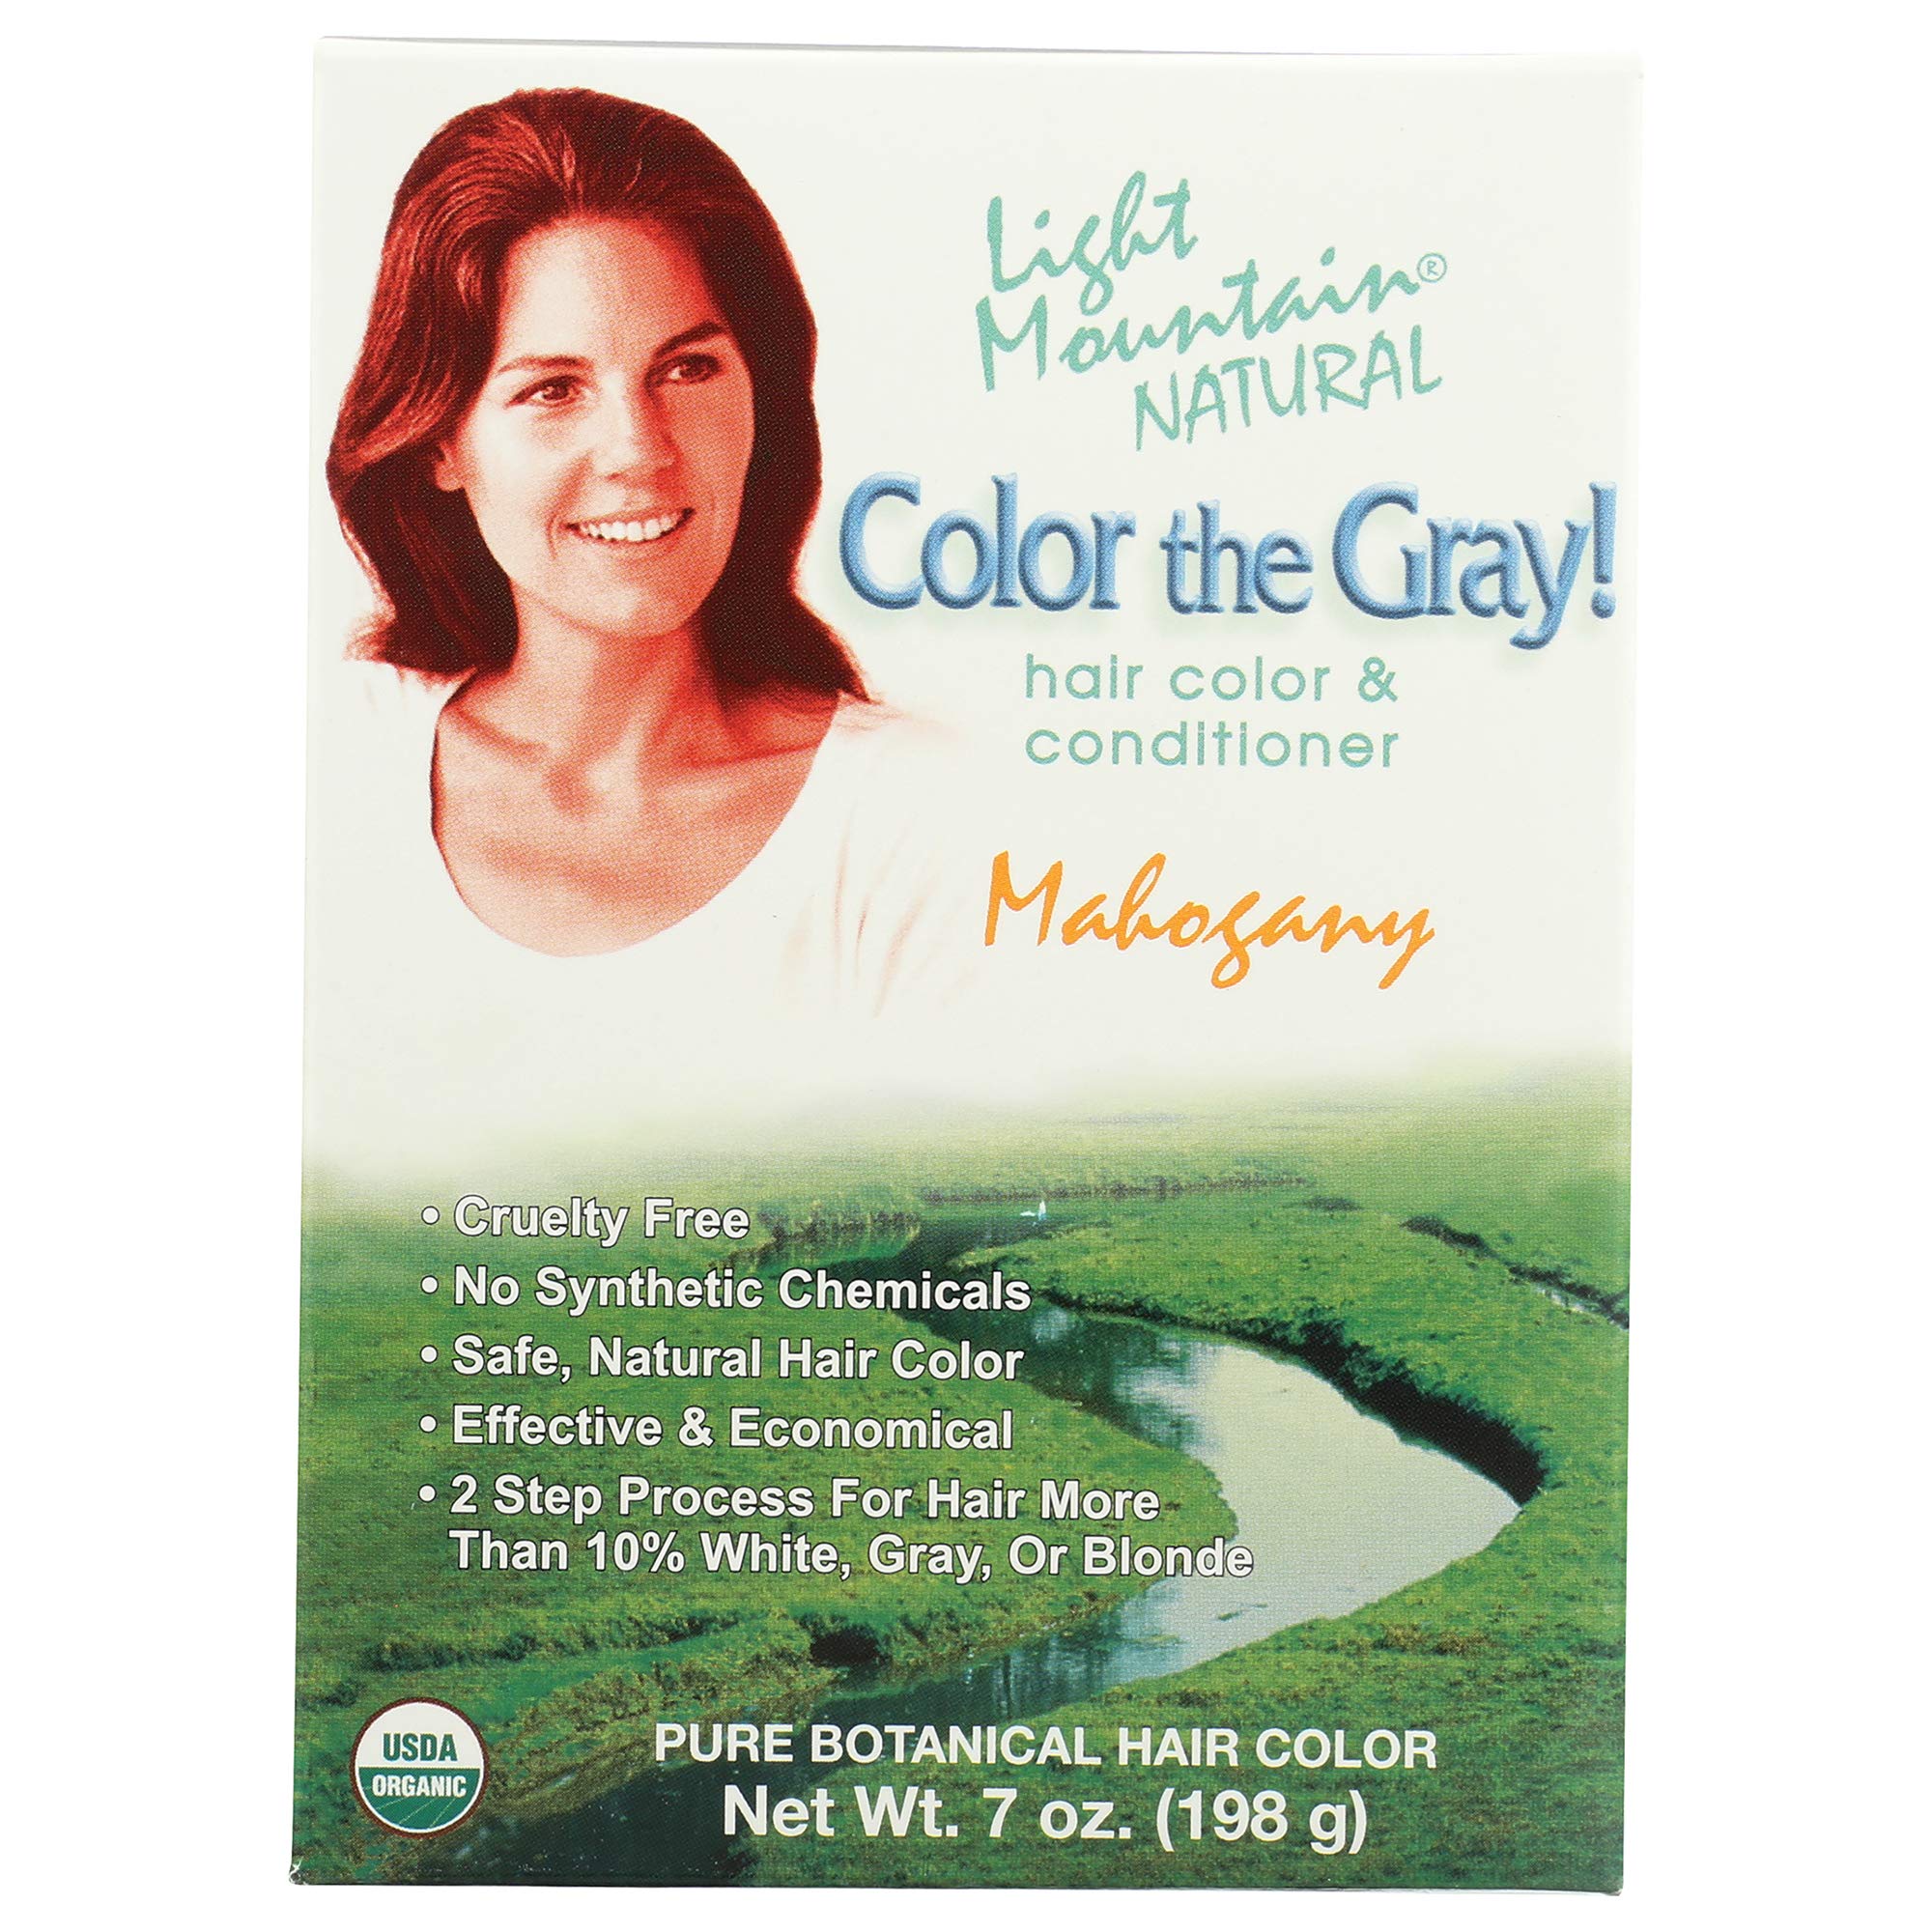 Light Mountain Natural Color The Gray! Hair Color & Conditioner, Mahogany, 7 oz (197 g) (Pack of 2)